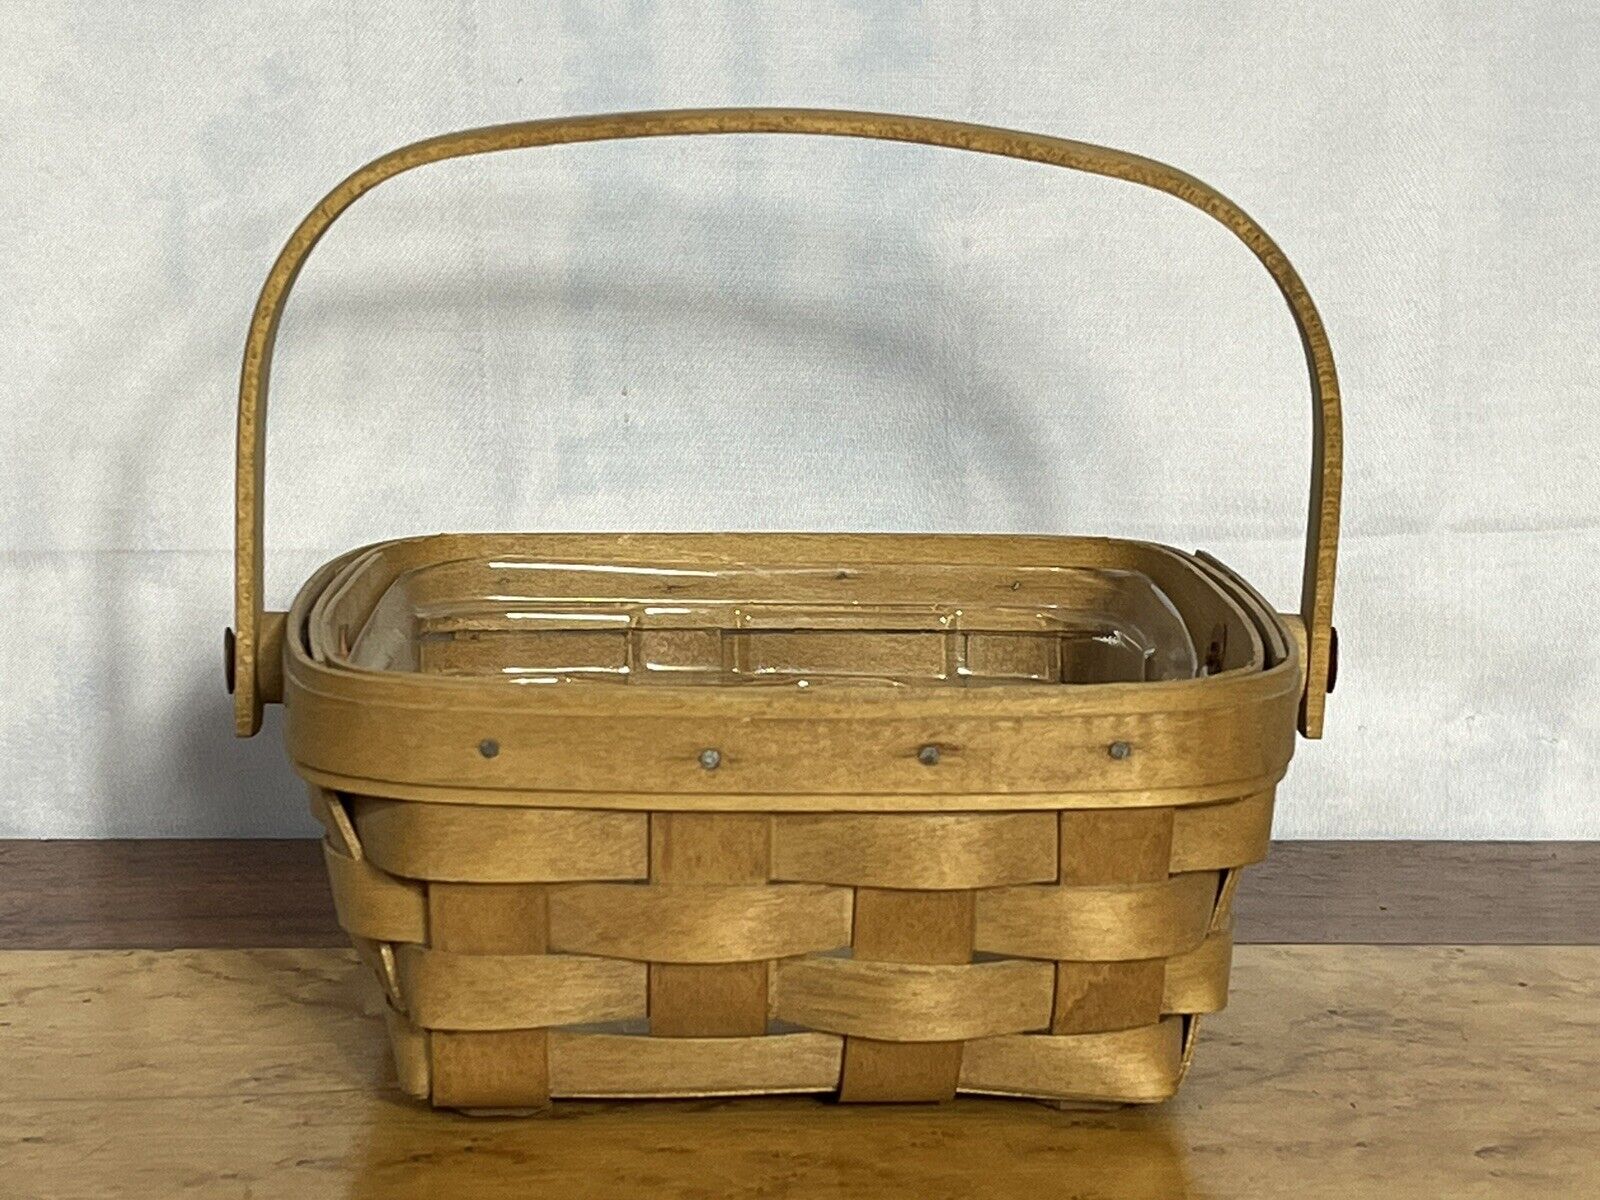 2003 Longaberger Small Square Berry Basket Handmade In The USA